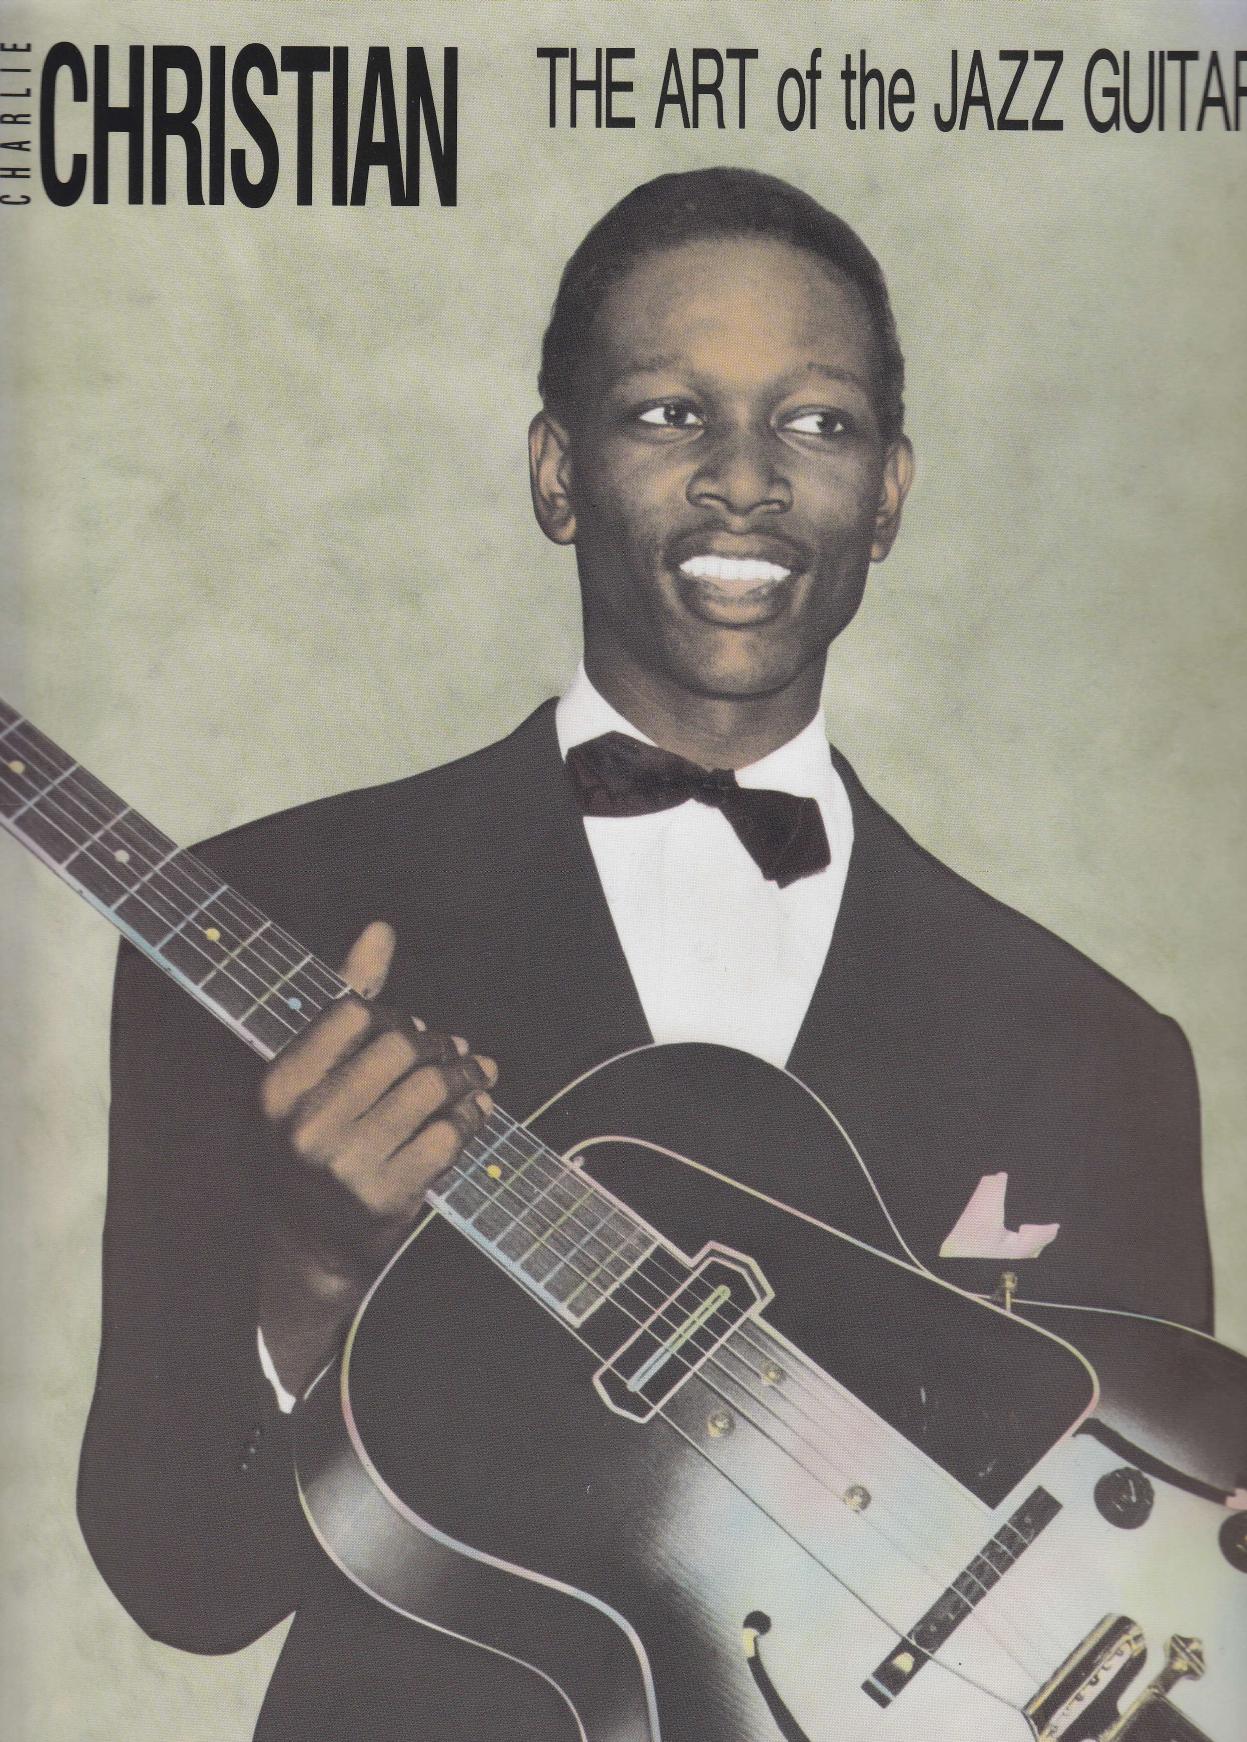 Charlie Christian: The Art of the Jazz Guitar